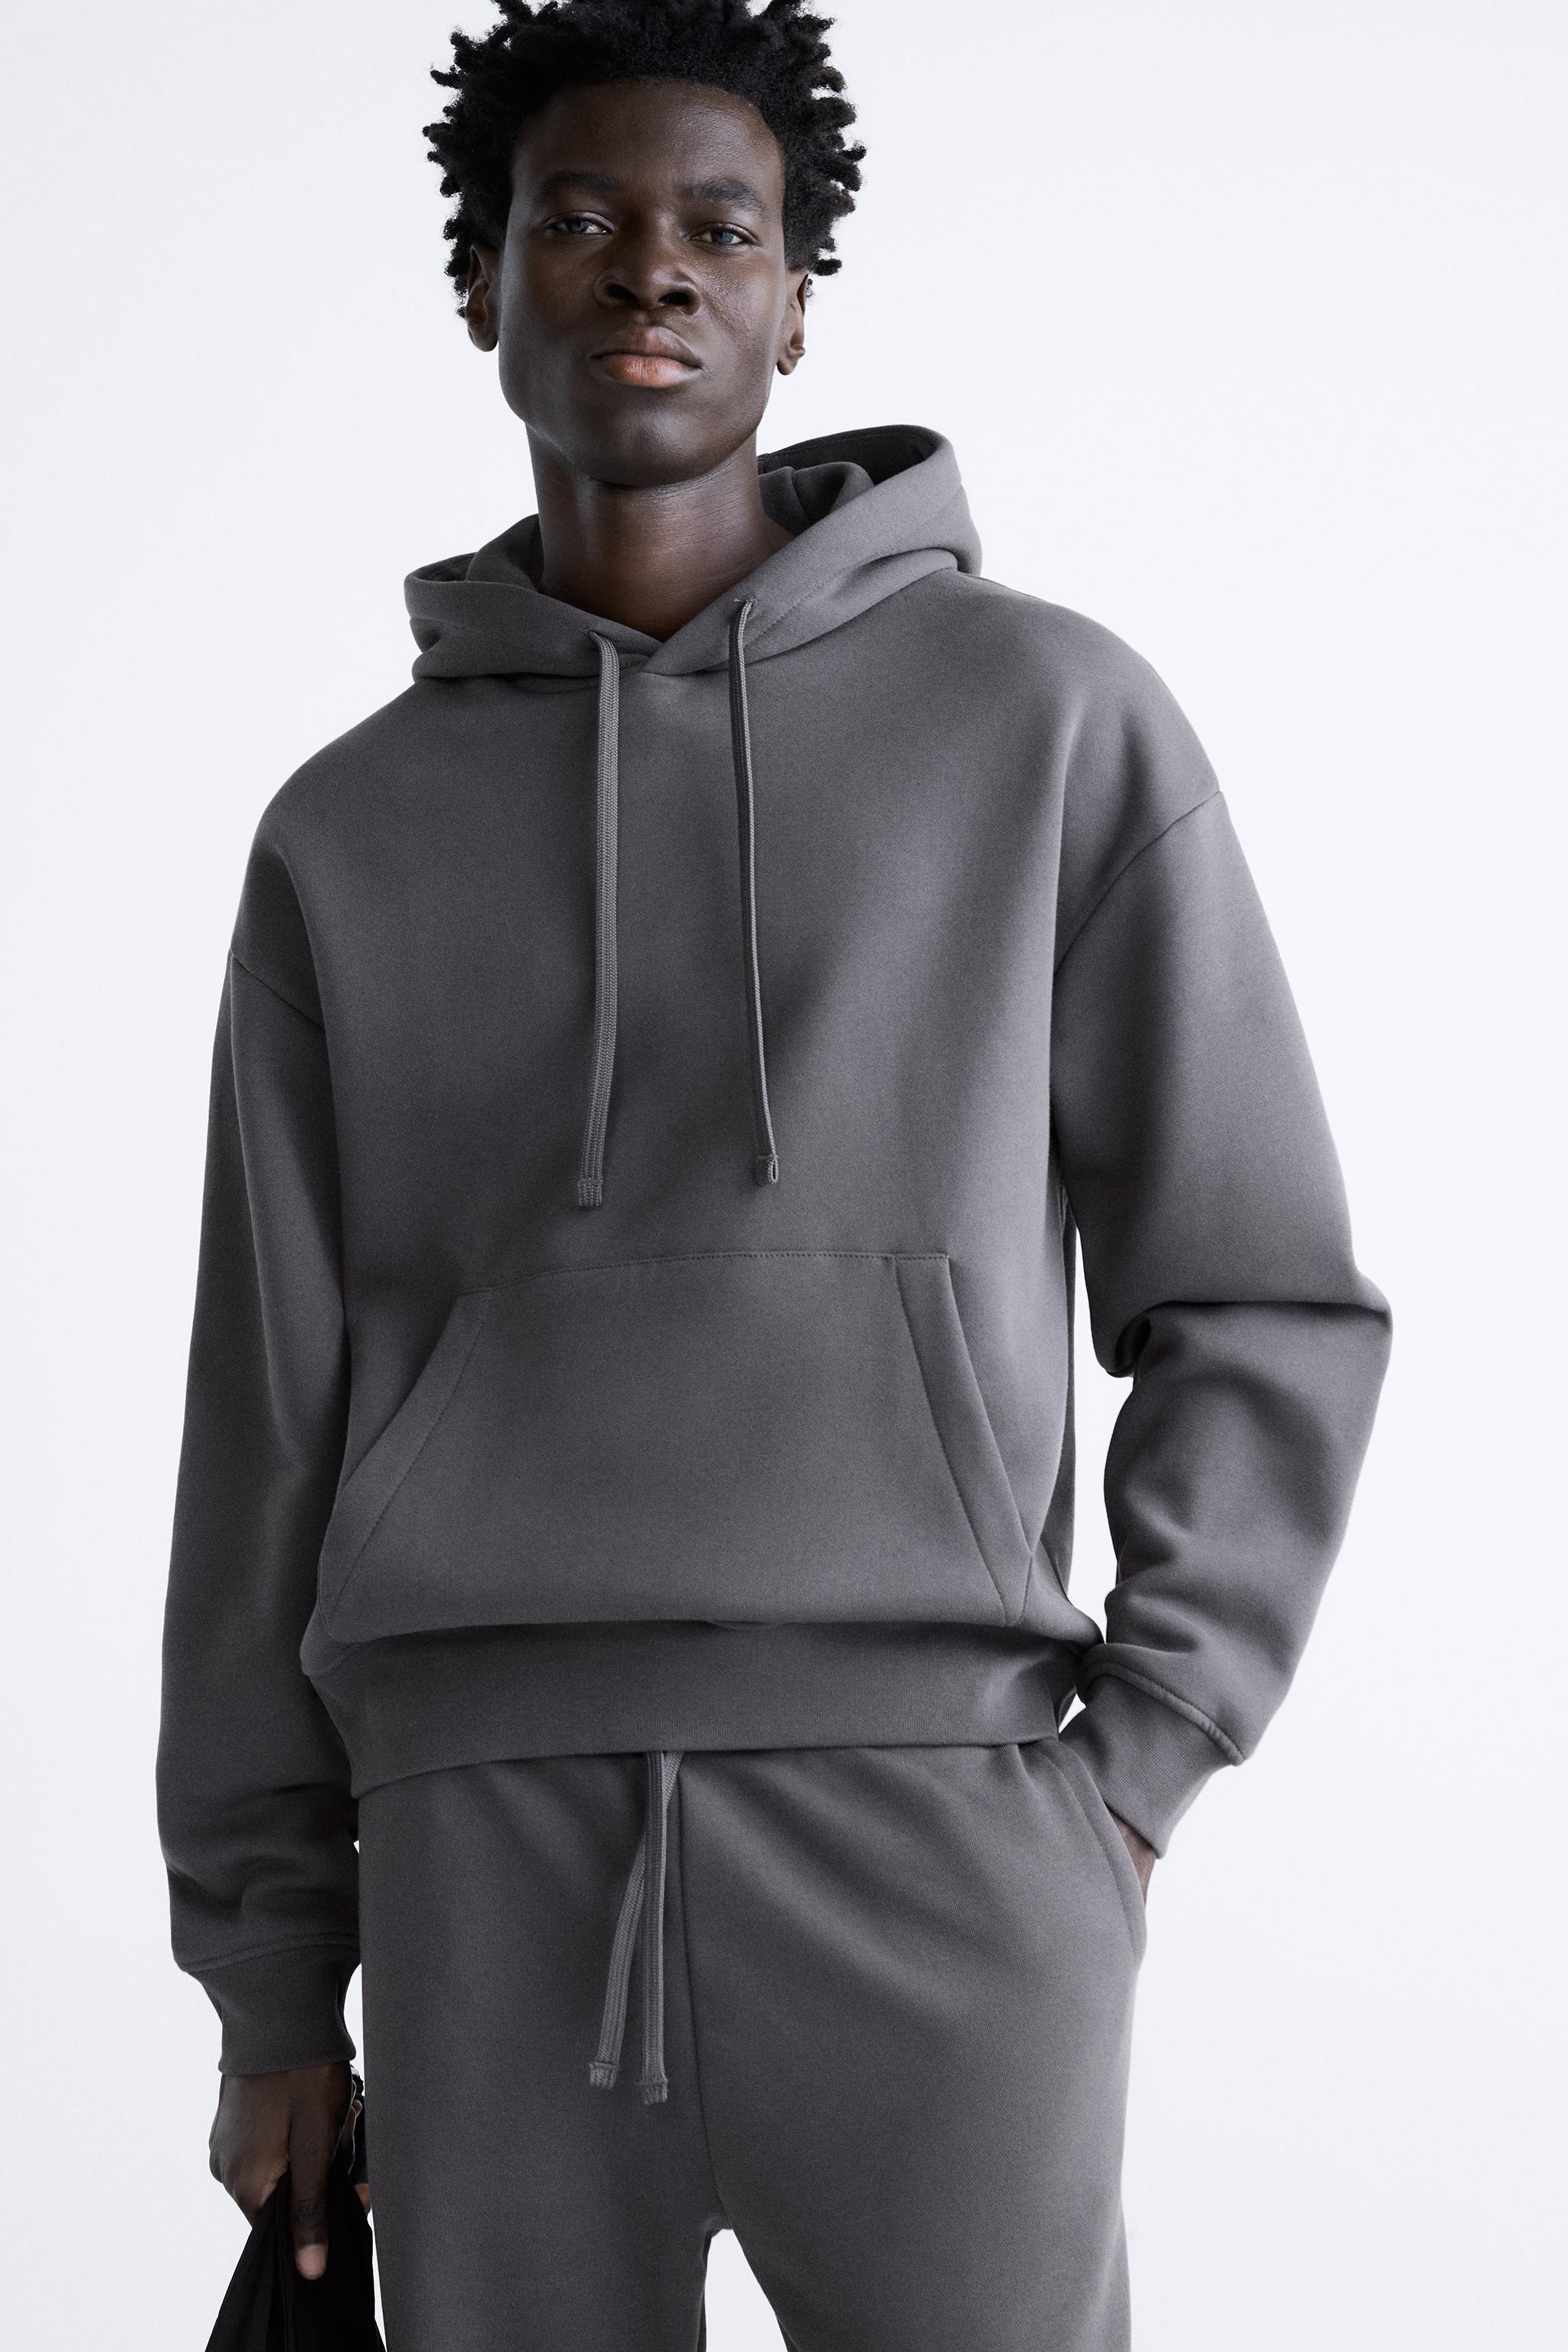 Grey sweatsuit. Hoodie with logo in the middle and matching sweatpants